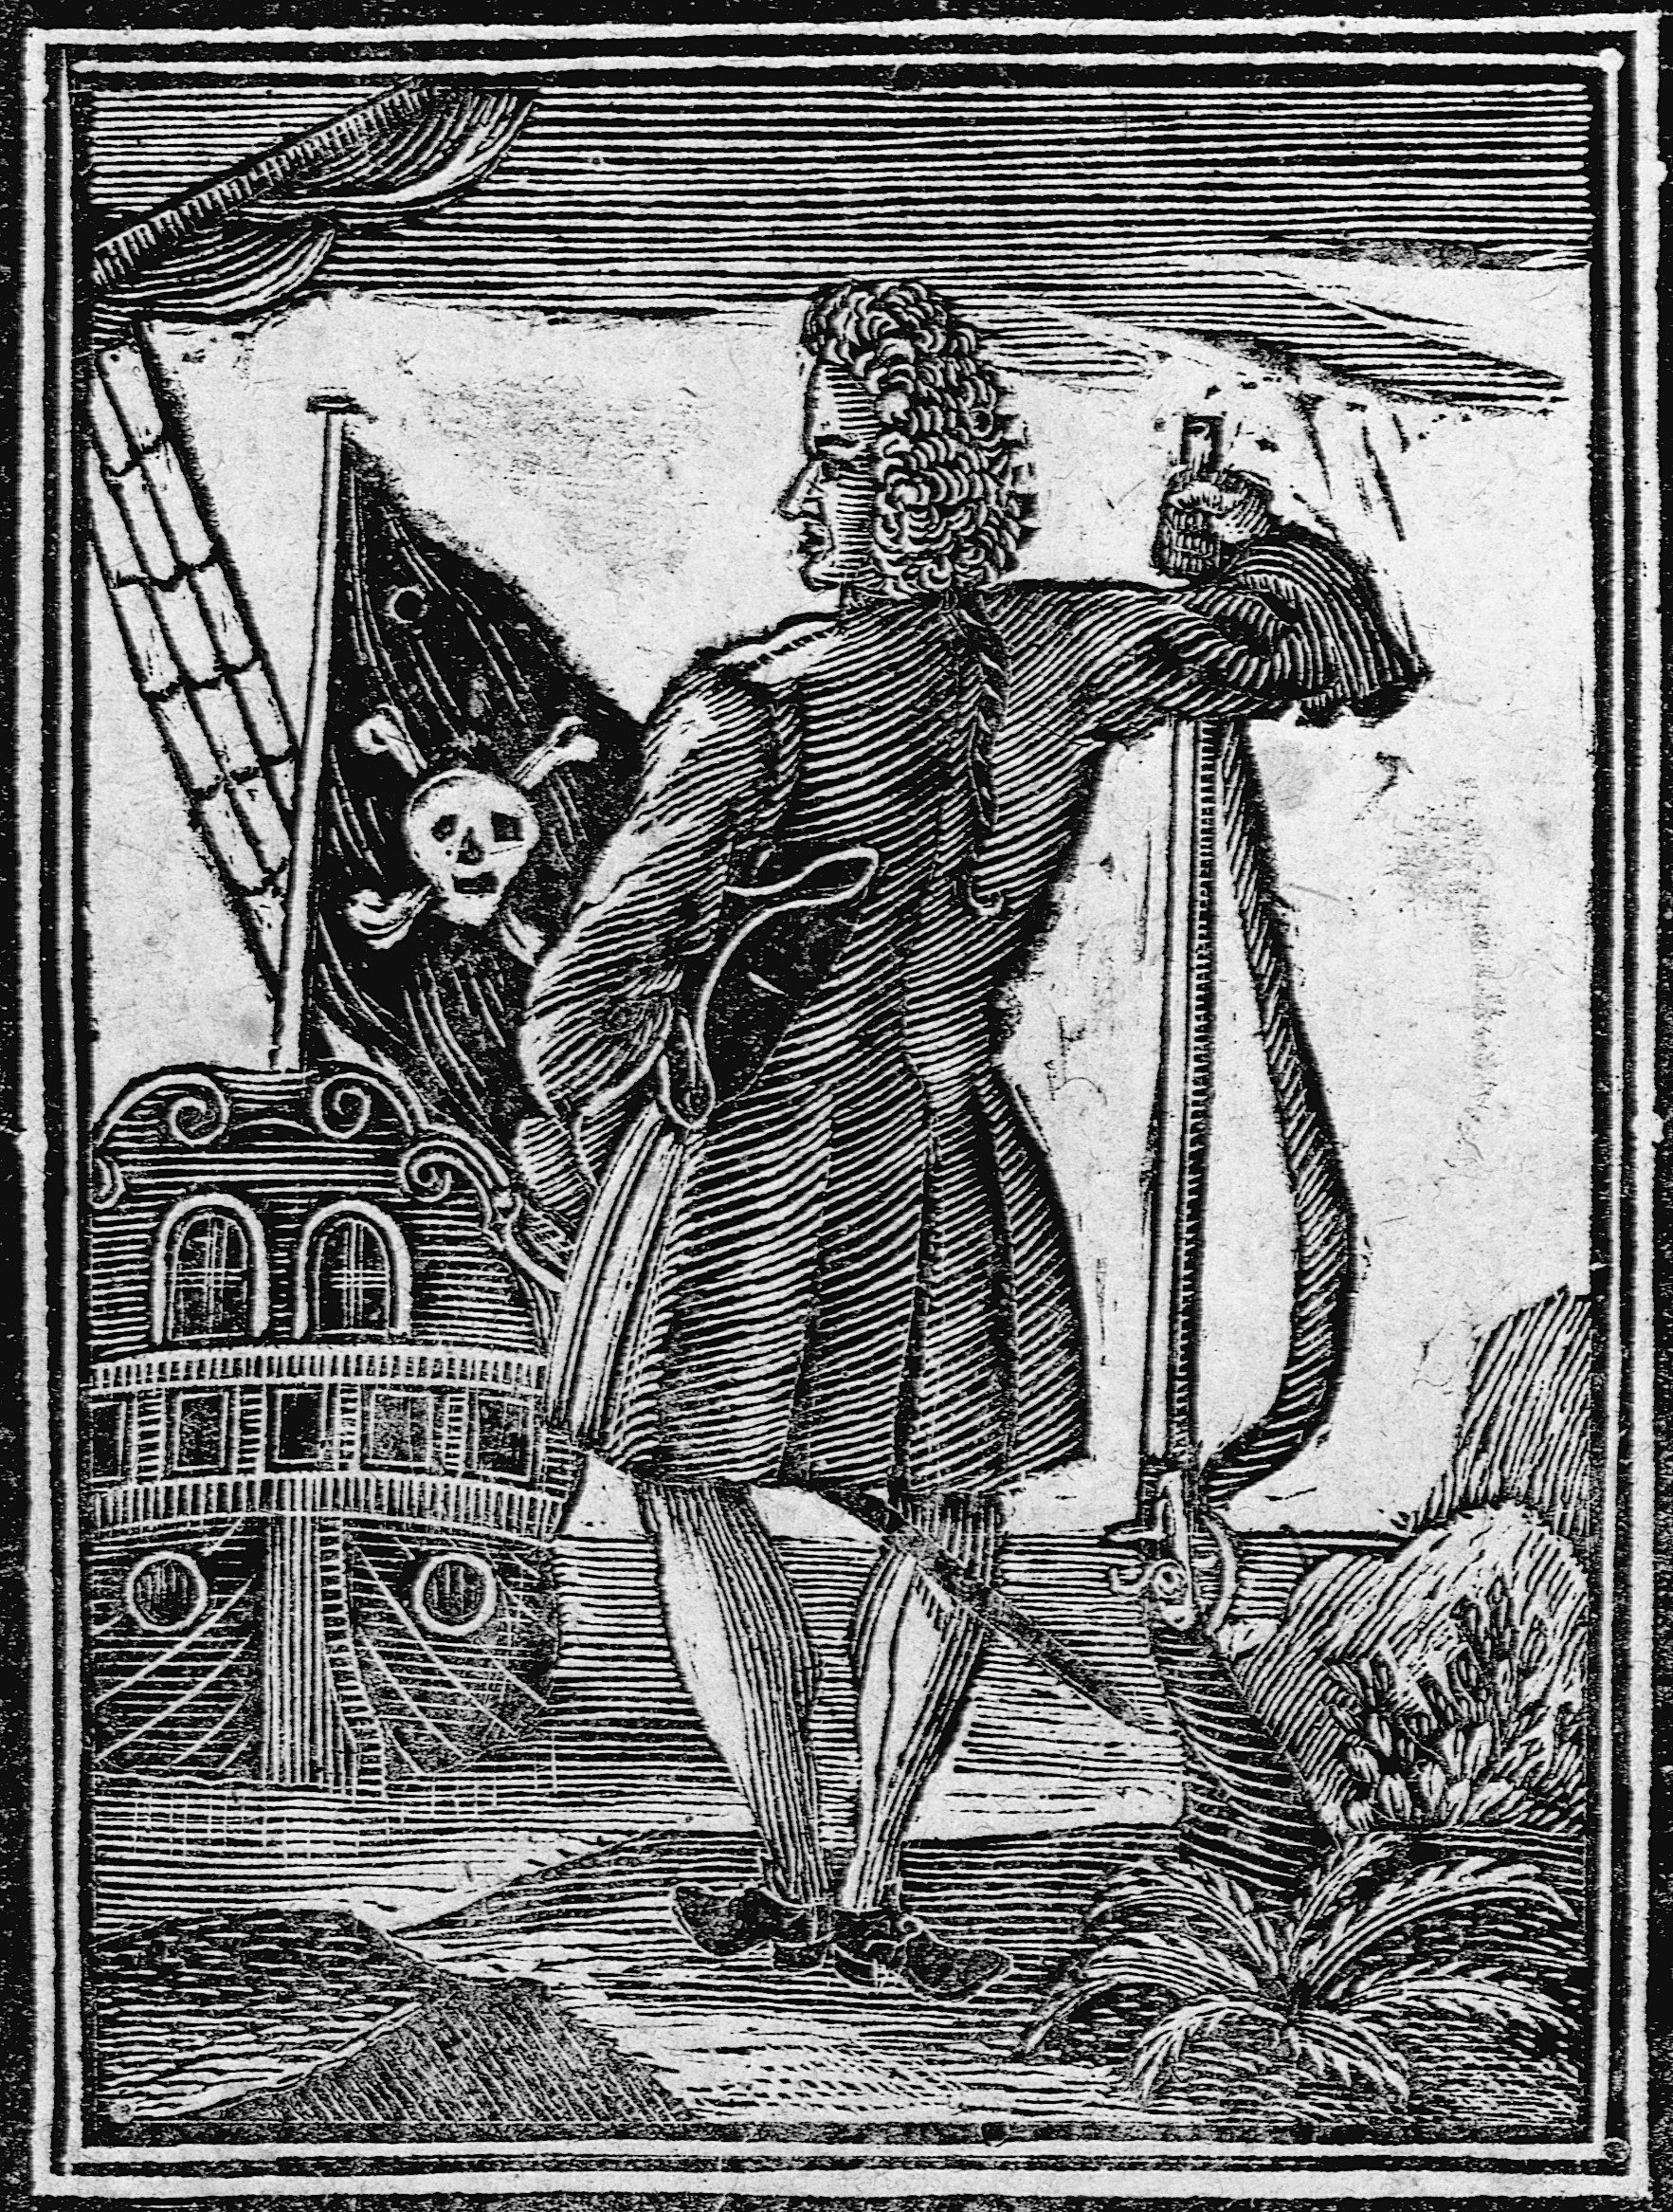 Pictured: Major Stede Bonnet, a Carolina coast pirate who died on the gallows shortly after his capture in 1718. (Provided)